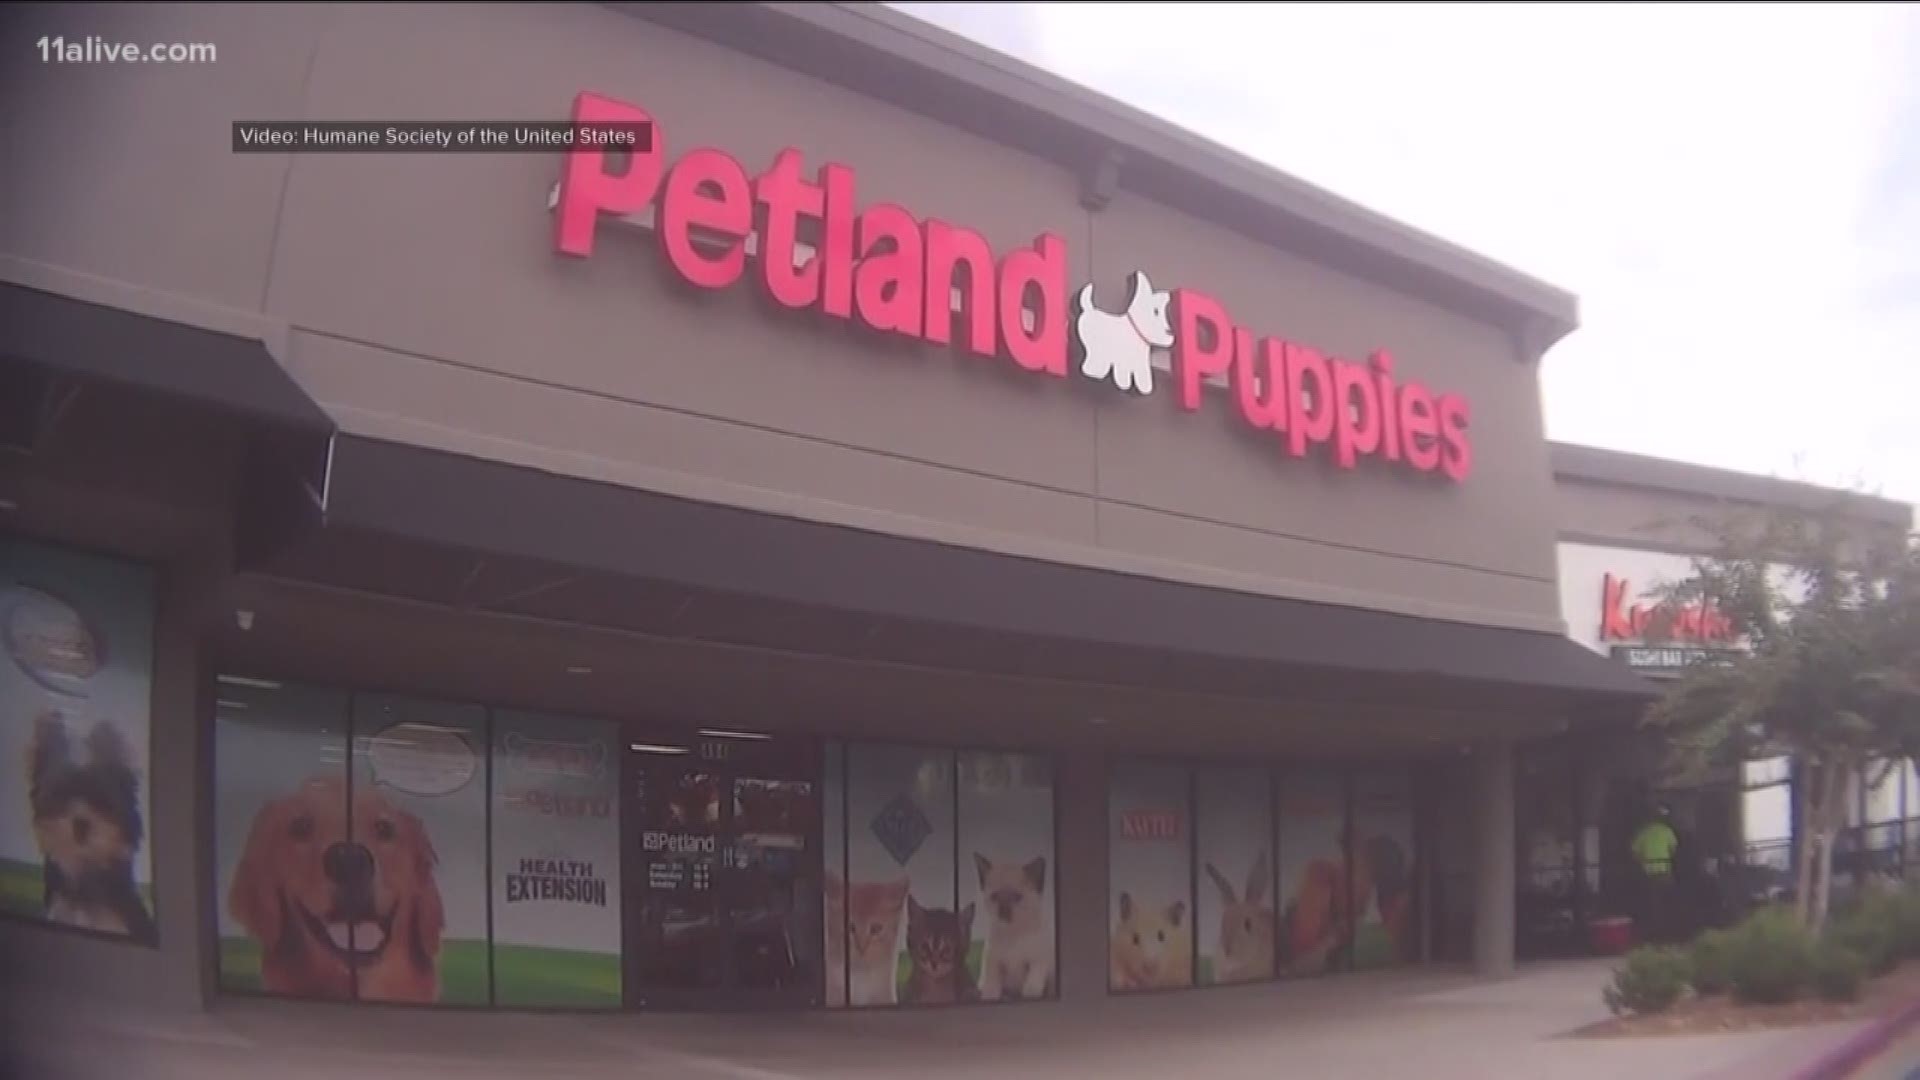 The Humane Society claims Petland stores prioritize profit over animal welfare, but representatives for Petland said that is not the case.